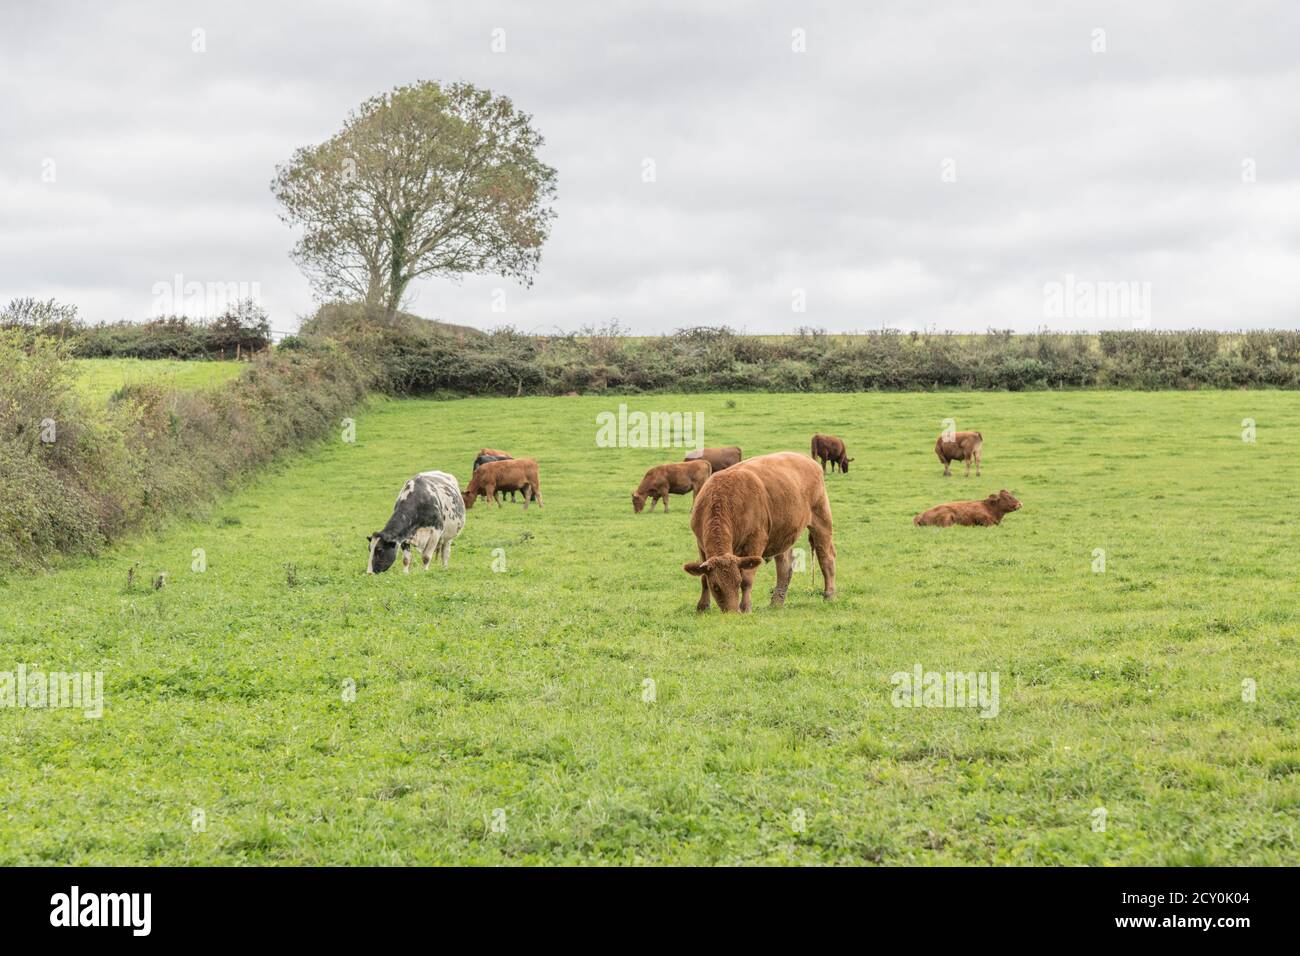 Small herd of young bullocks of mixed colours, with matriarch being the white cow. For UK livestock industry, British beef, UK farming, animal welfare Stock Photo